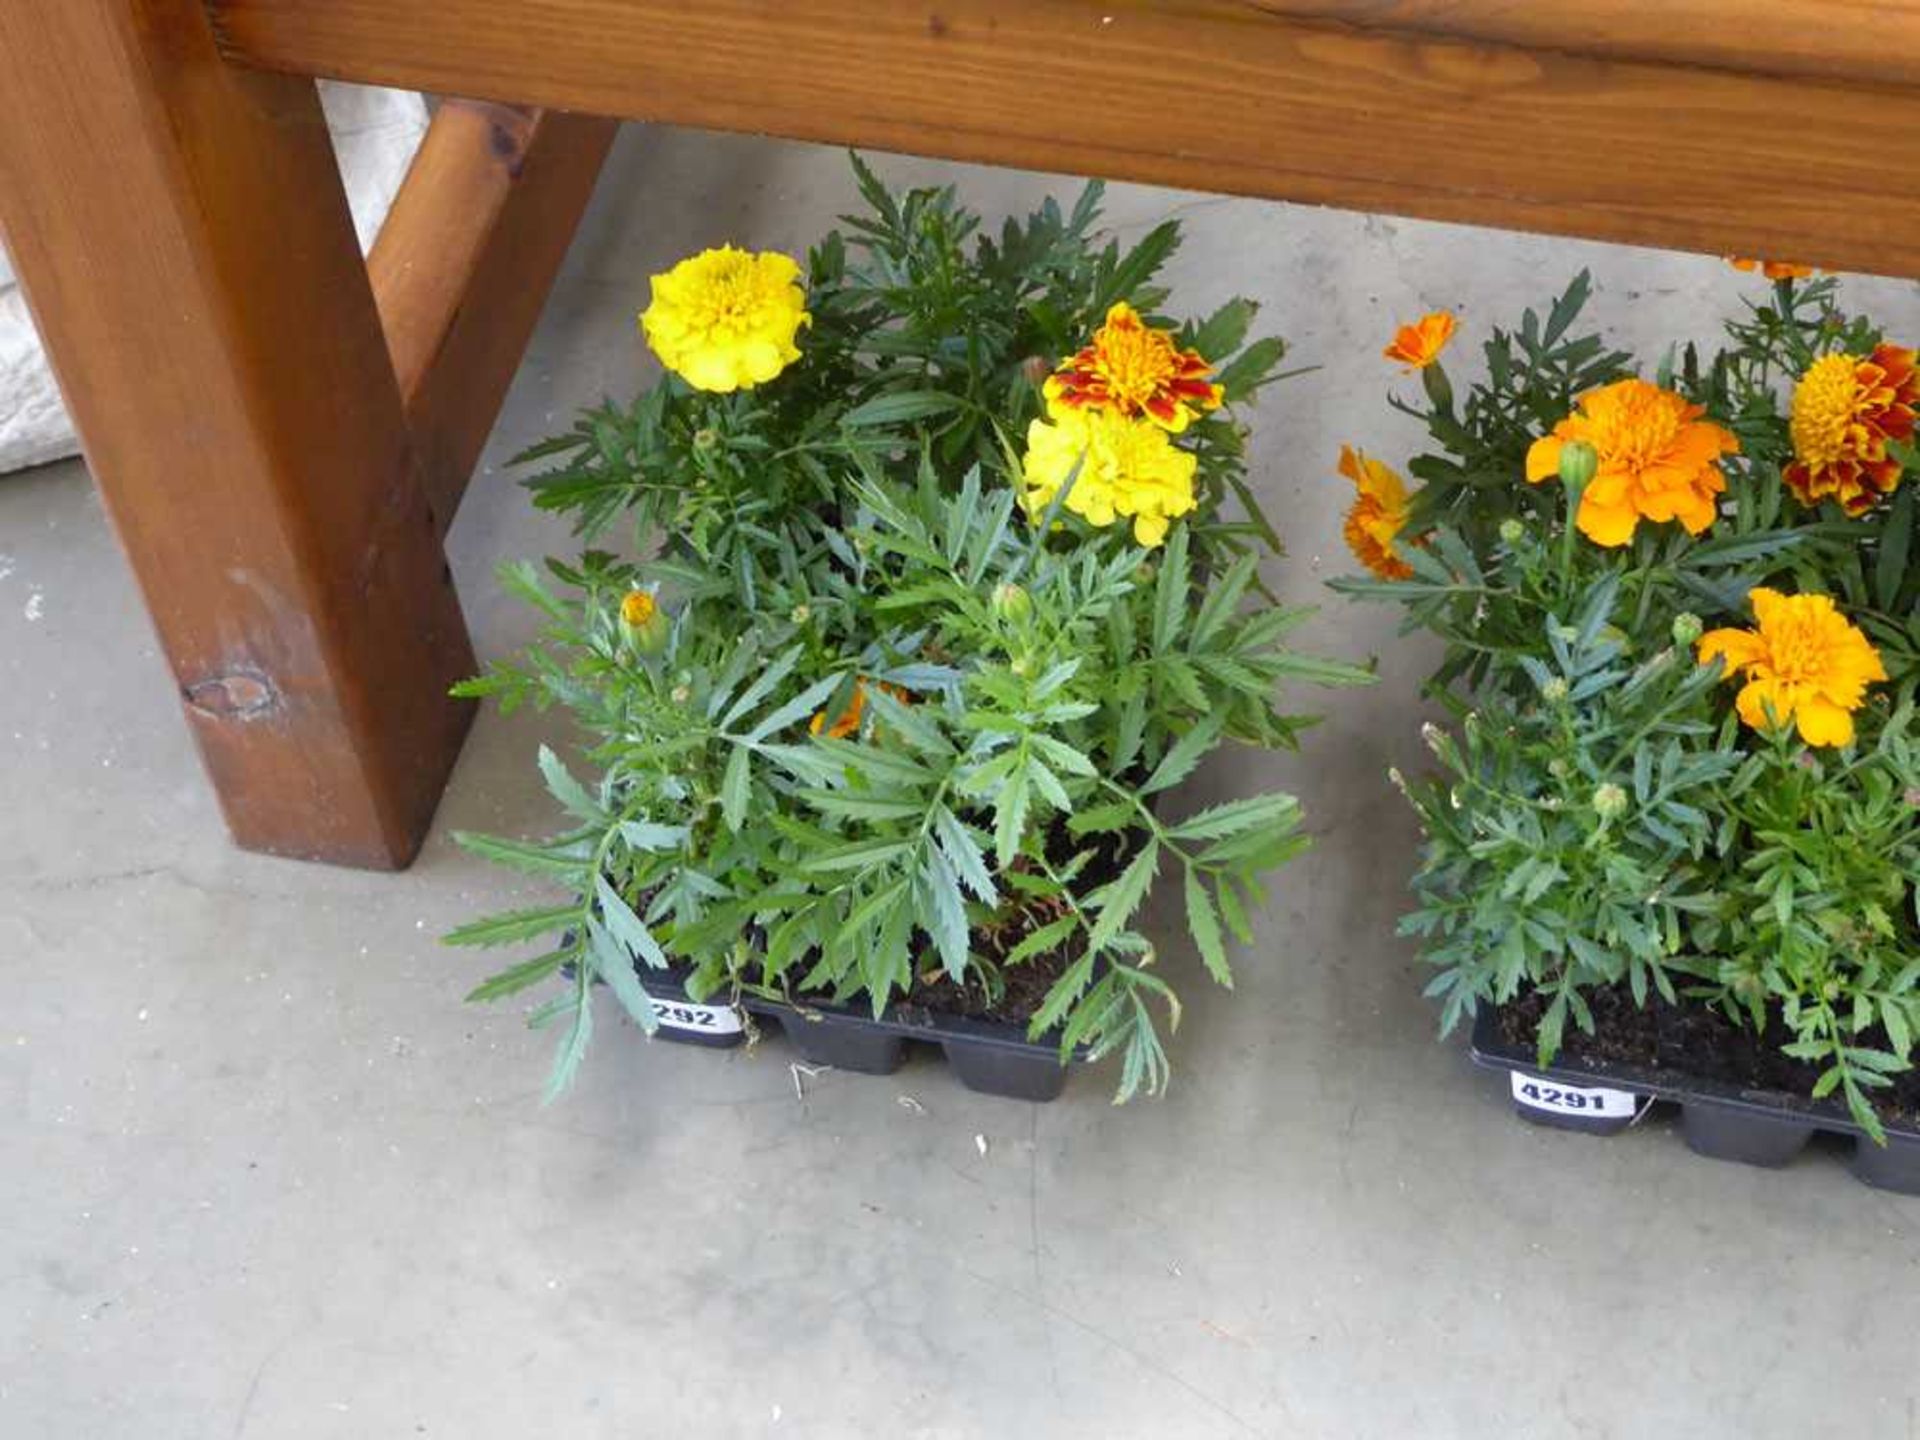 Tray of marigolds